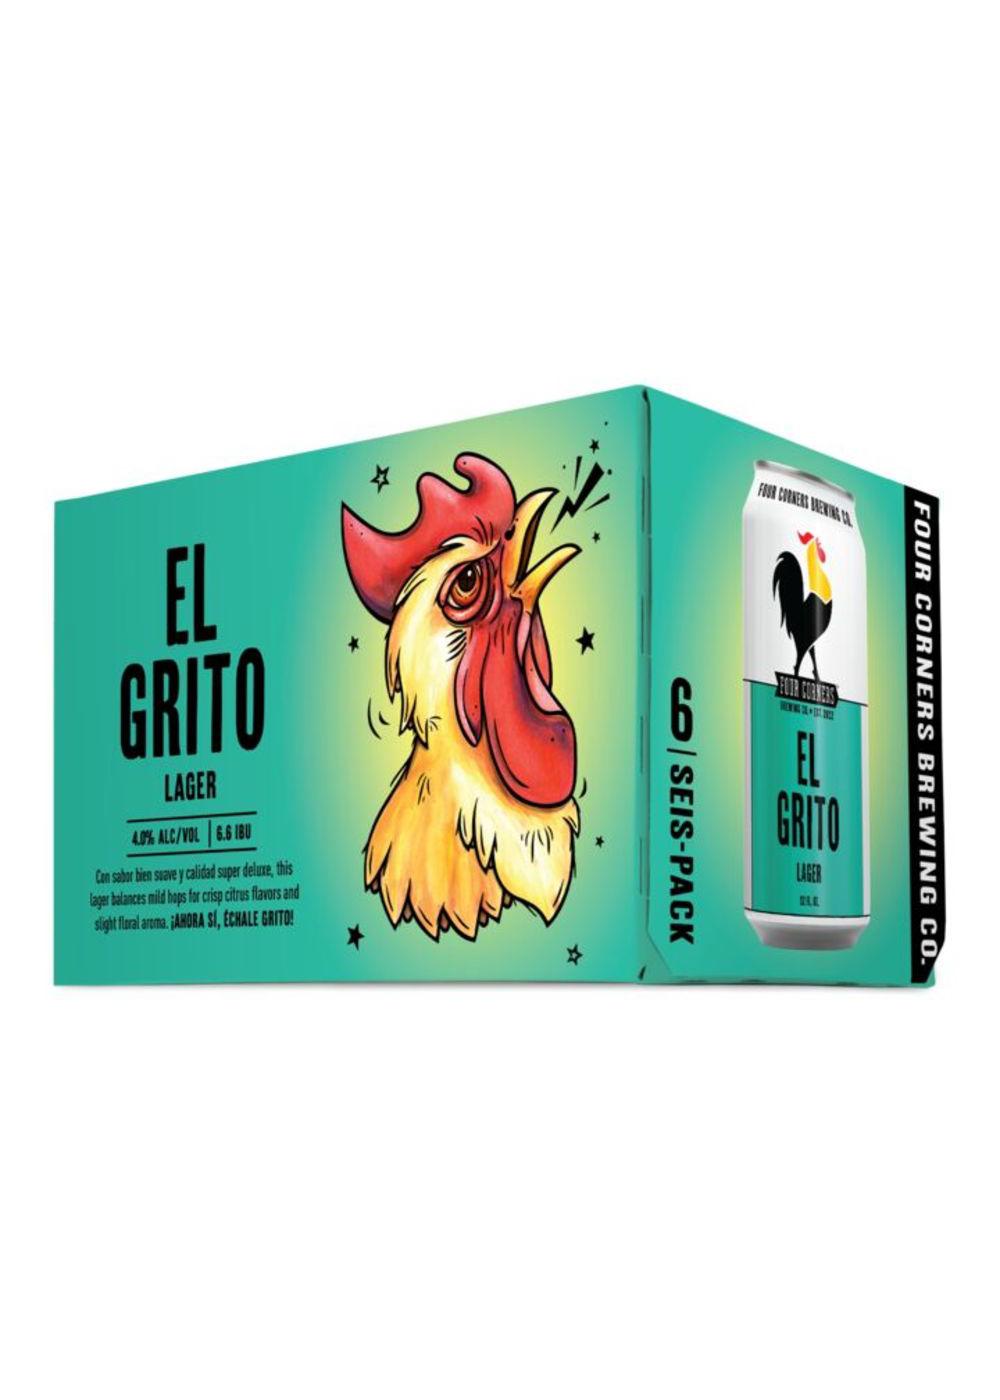 Four Corners El Grito Lager Beer 6 pk Cans; image 3 of 4